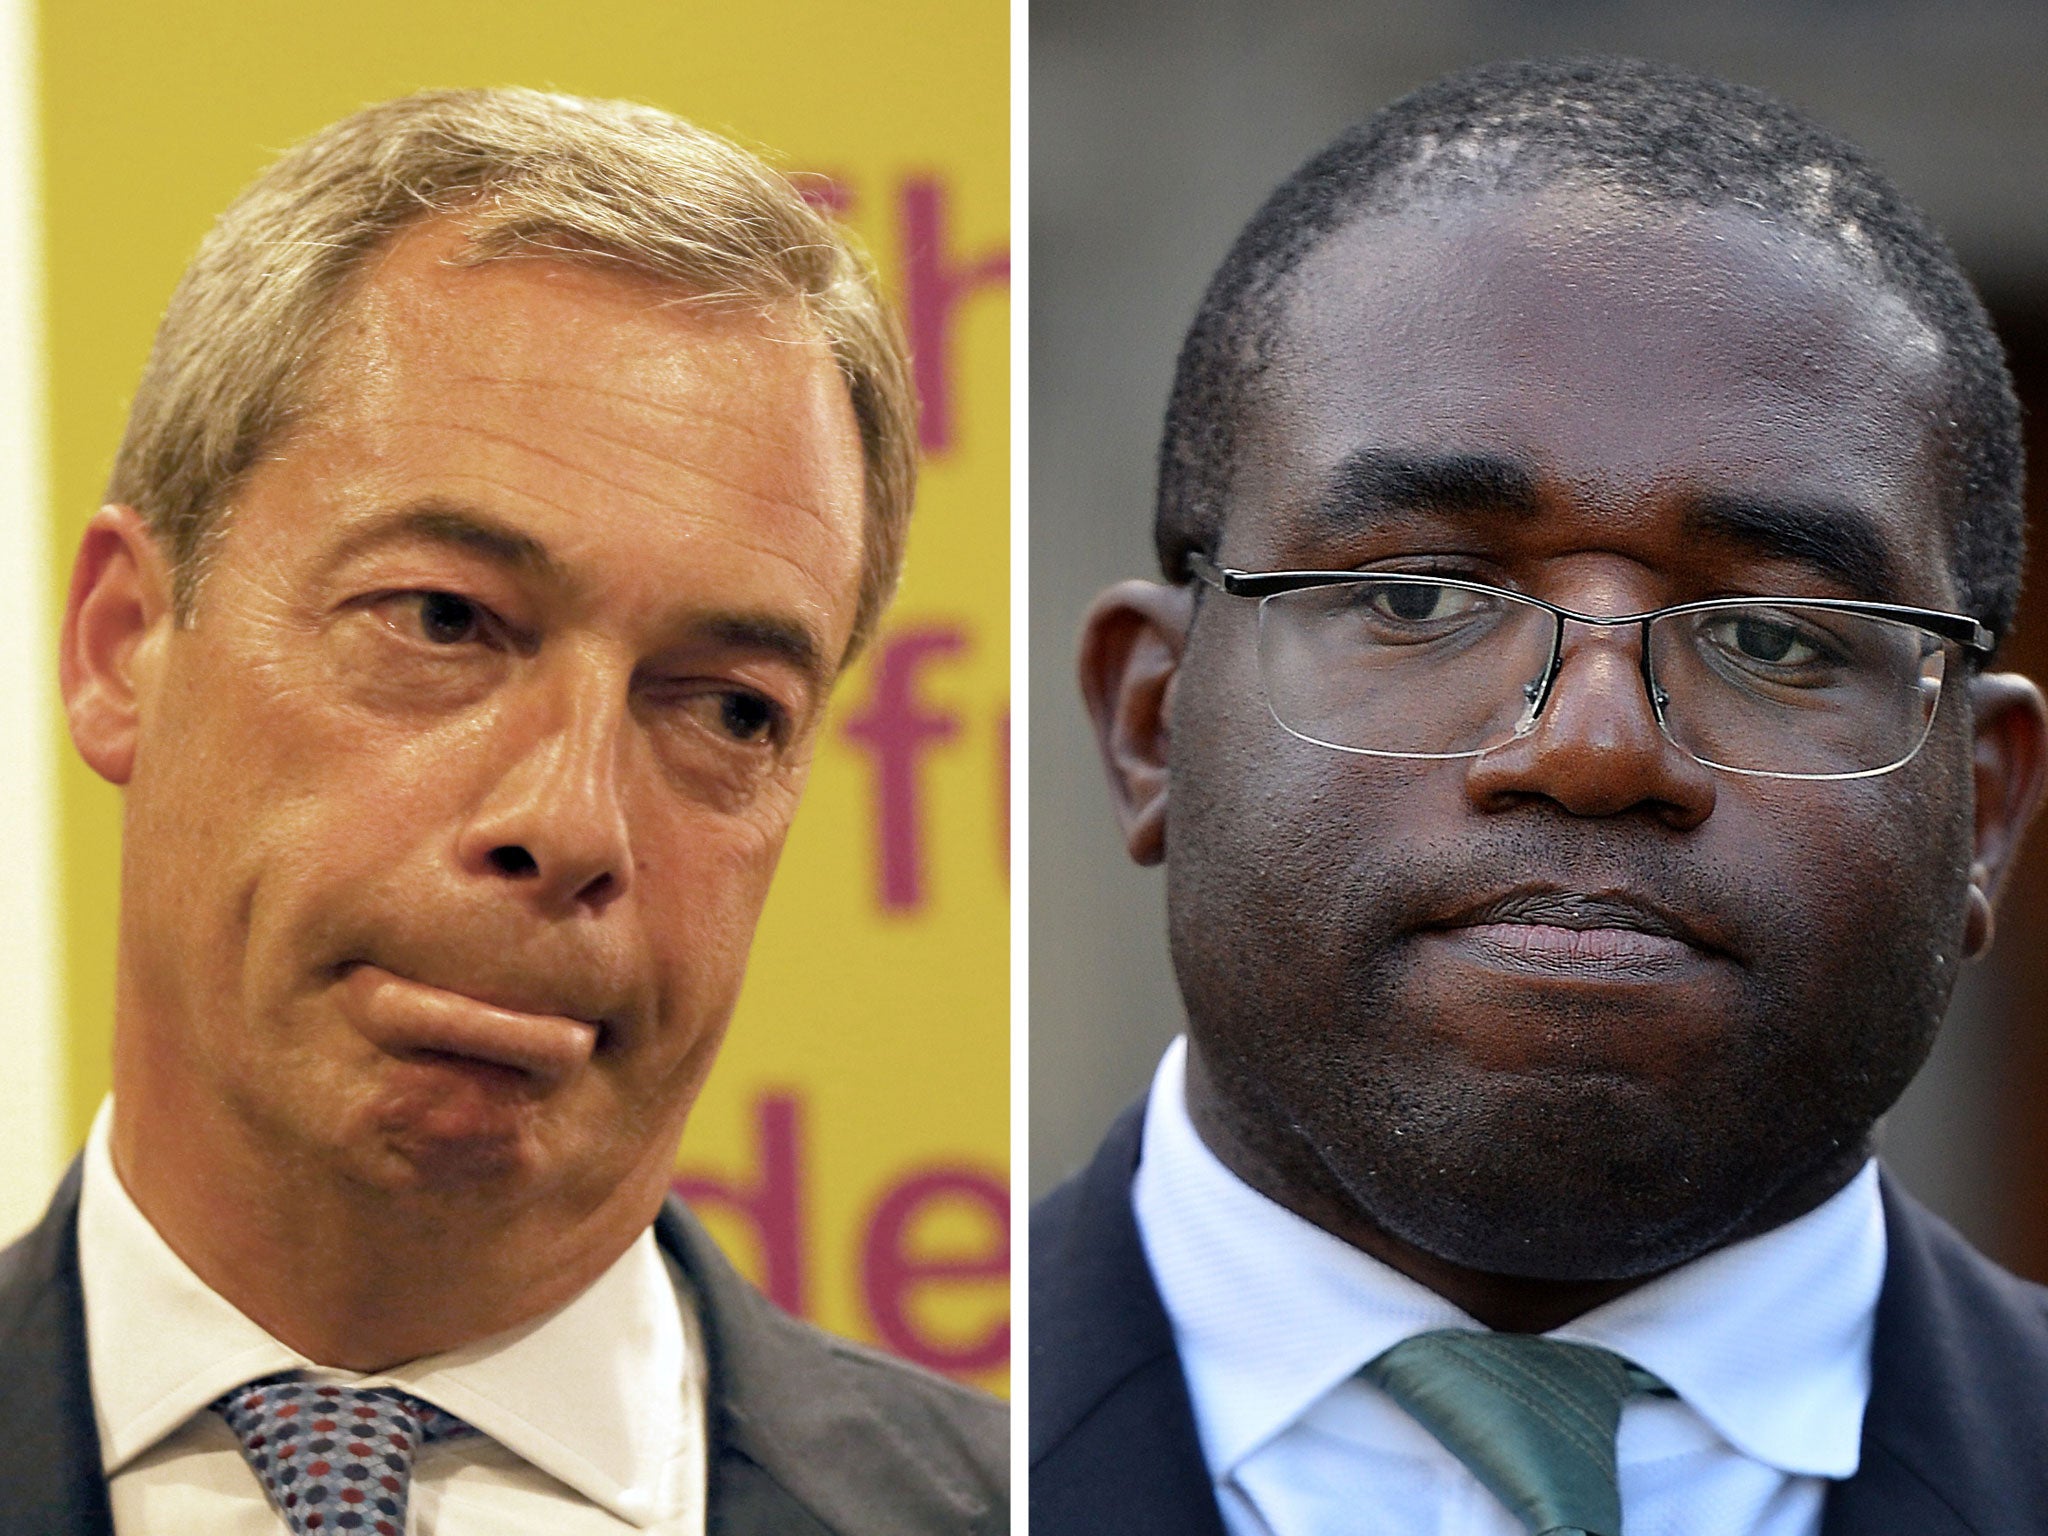 The Labour MP David Lammy (right) has accused Ukip leader Nigel Farage of being 'clearly a racist' after he said he would be 'uncomfortable' if a family of Romanians moved in next door